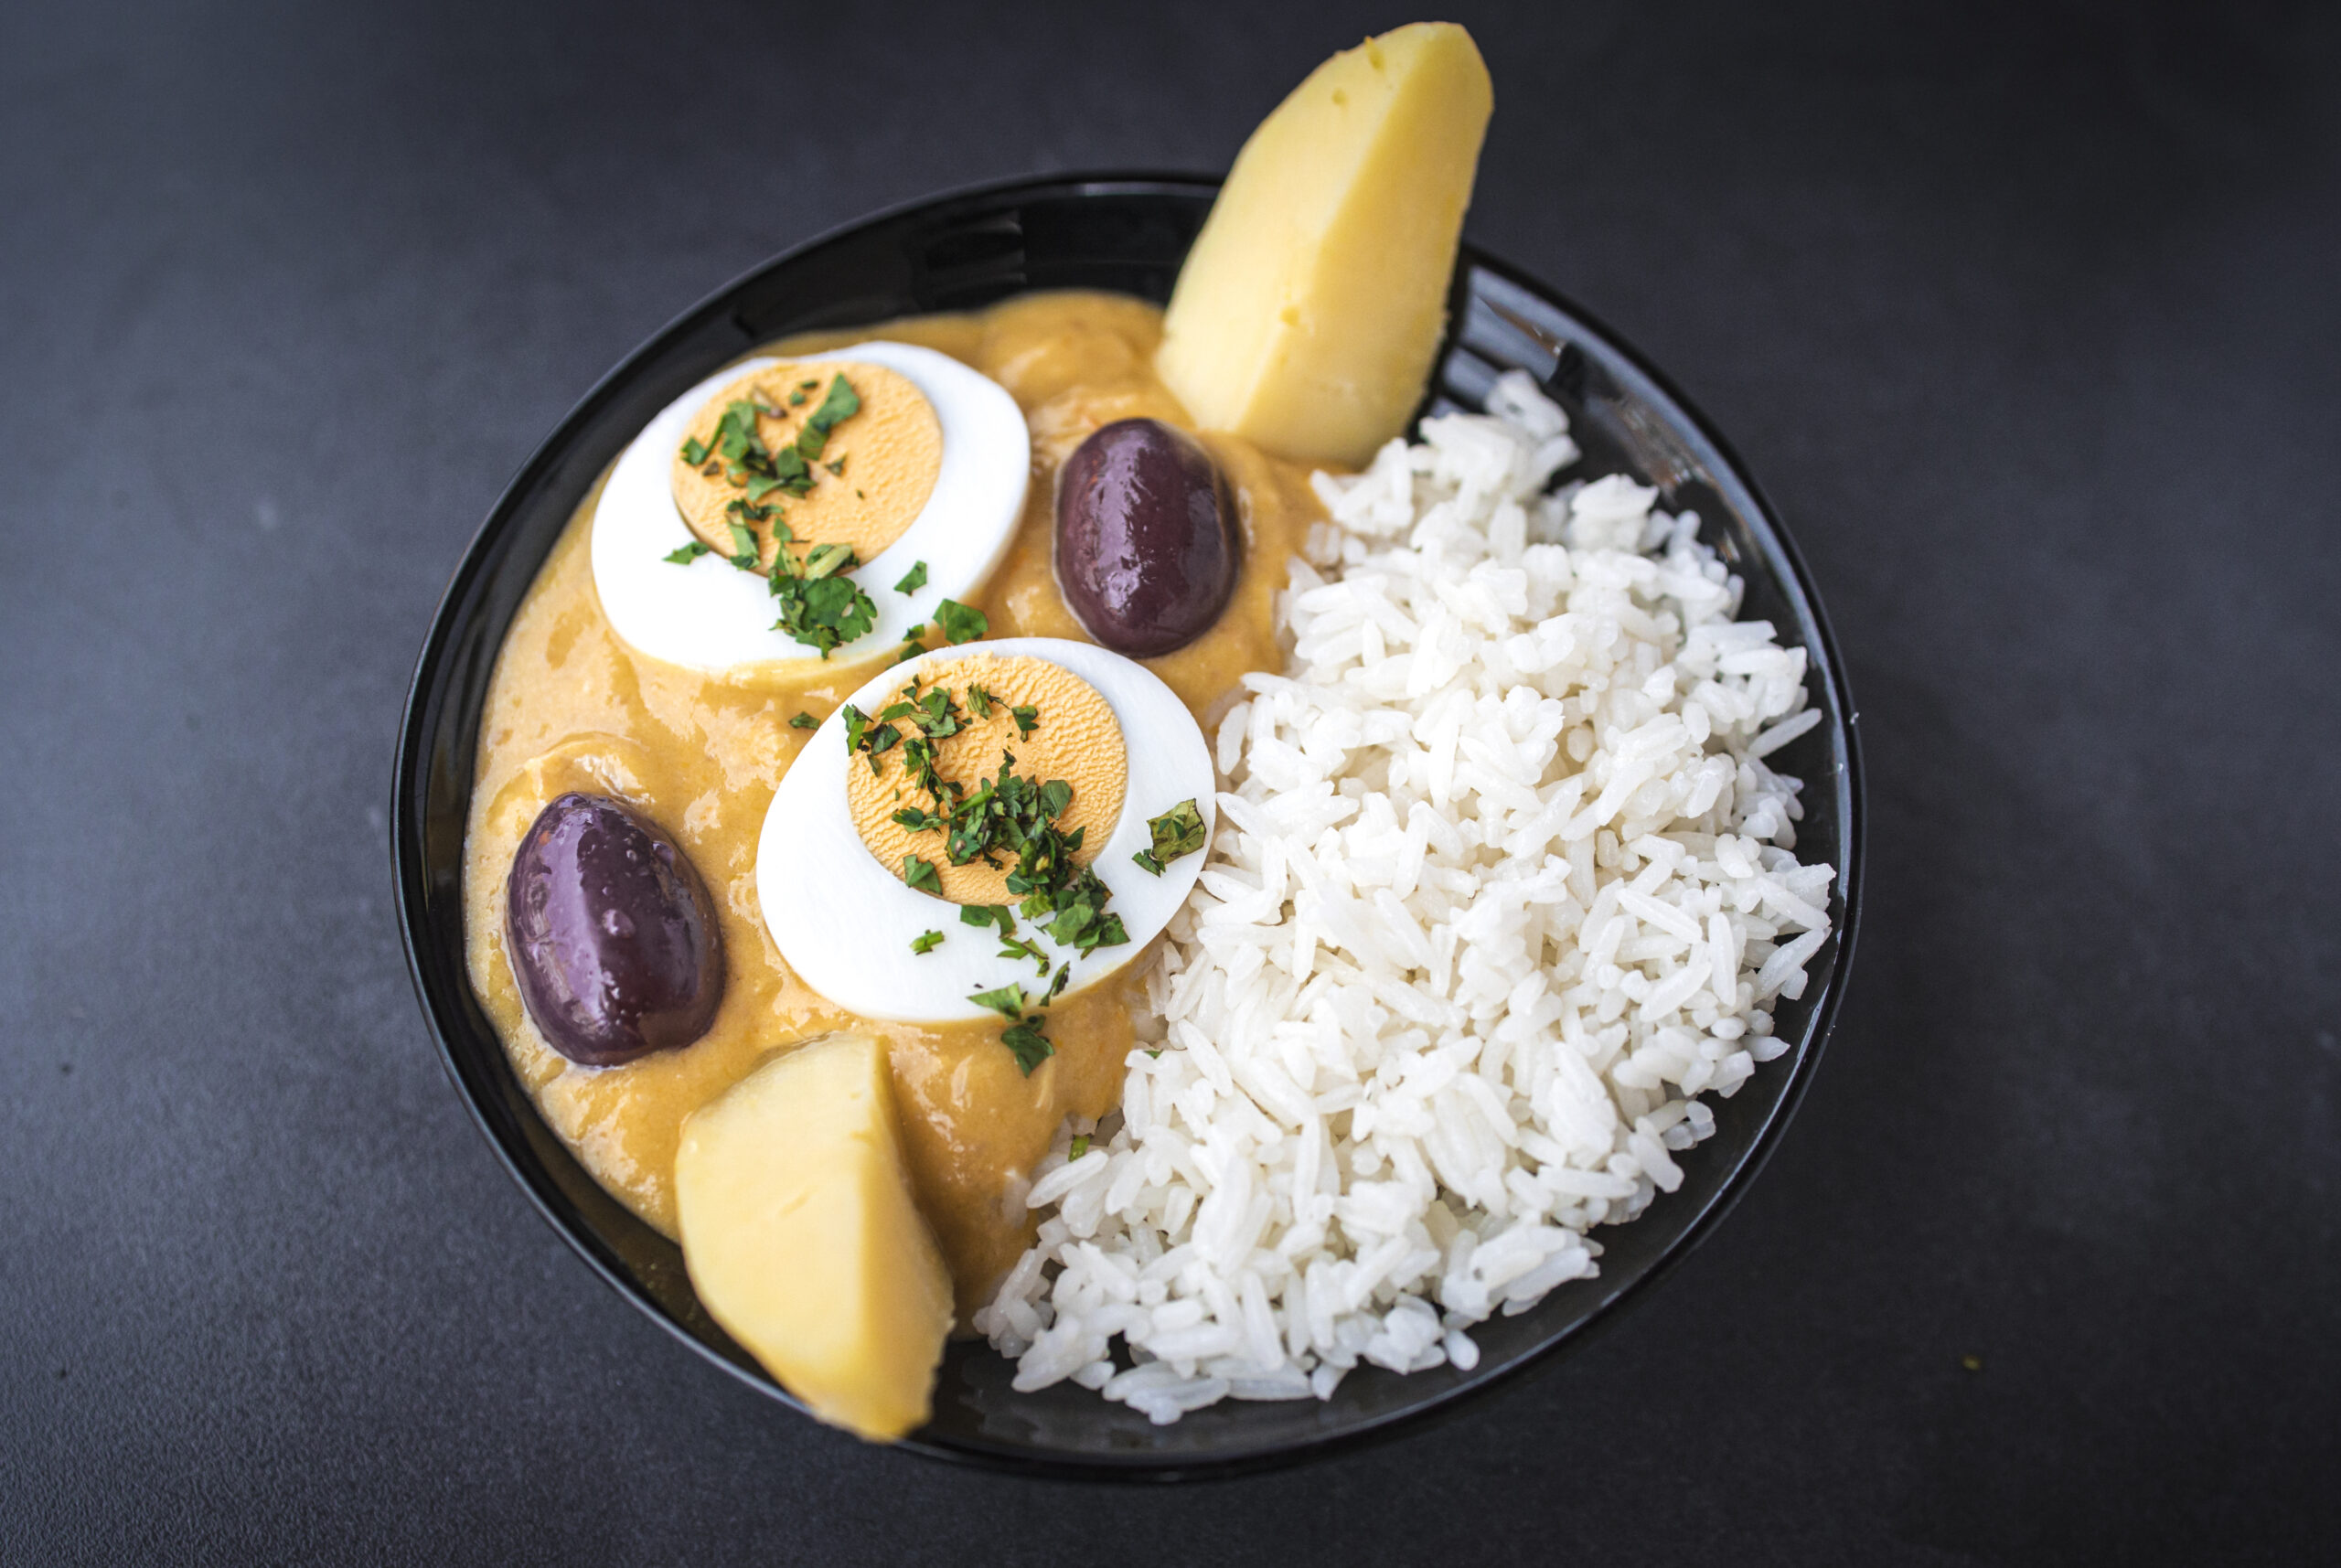 Aji de gallina or Peruvian curry is a comfort chicken stew served with rice at the table. Top horizontal view from above